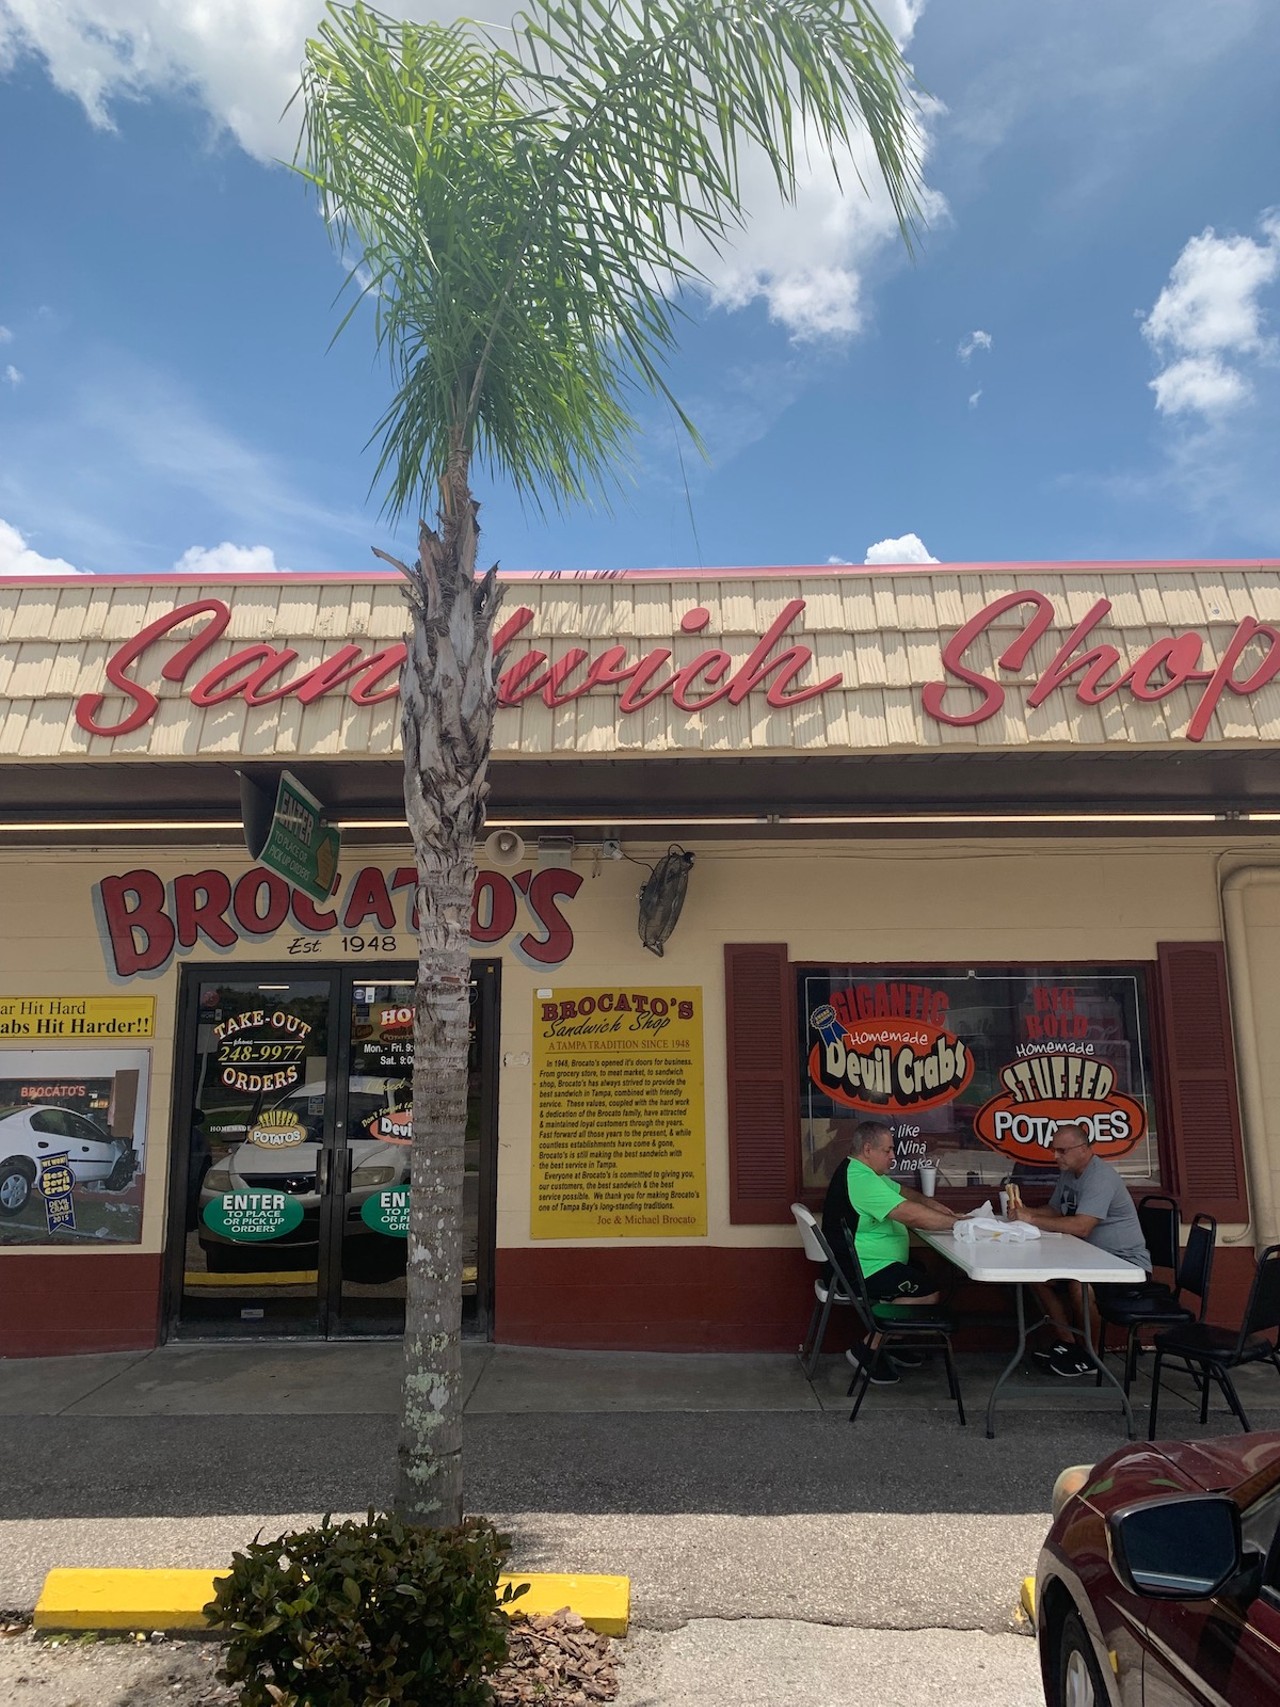 Try the devil crab at Brocato's5021 E Columbus Dr., Tampa. (813) 248-9977 We have some great restaurants in Tampa Bay, and more open all the time. Don't forget the classics, like Brocato's in Tampa, where the devil crab is fried and delicious.